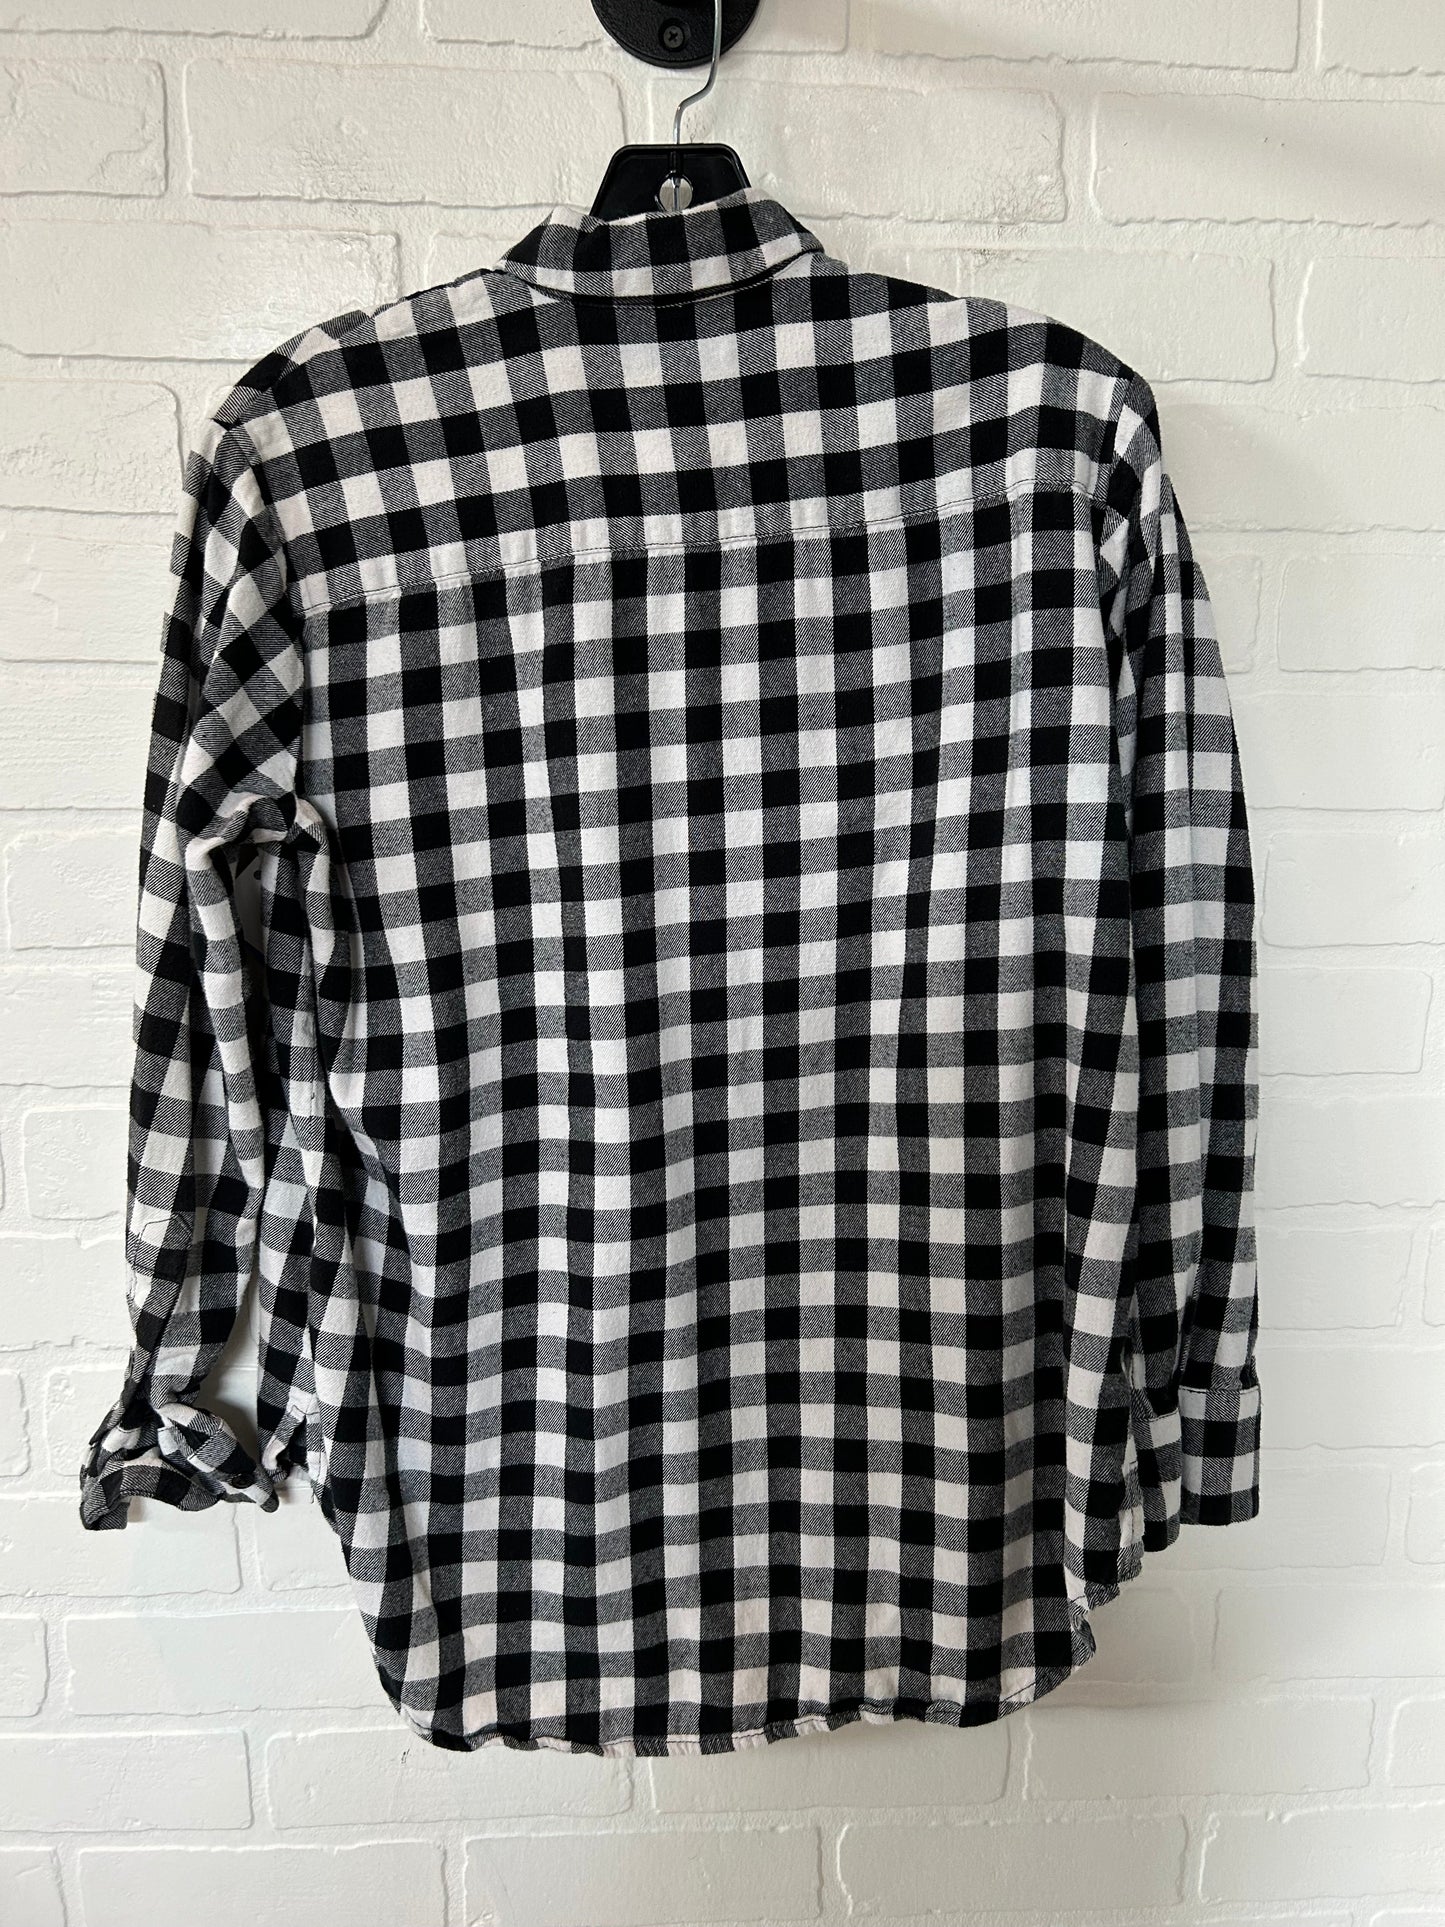 White Black Top Long Sleeve Madewell, Size Xs